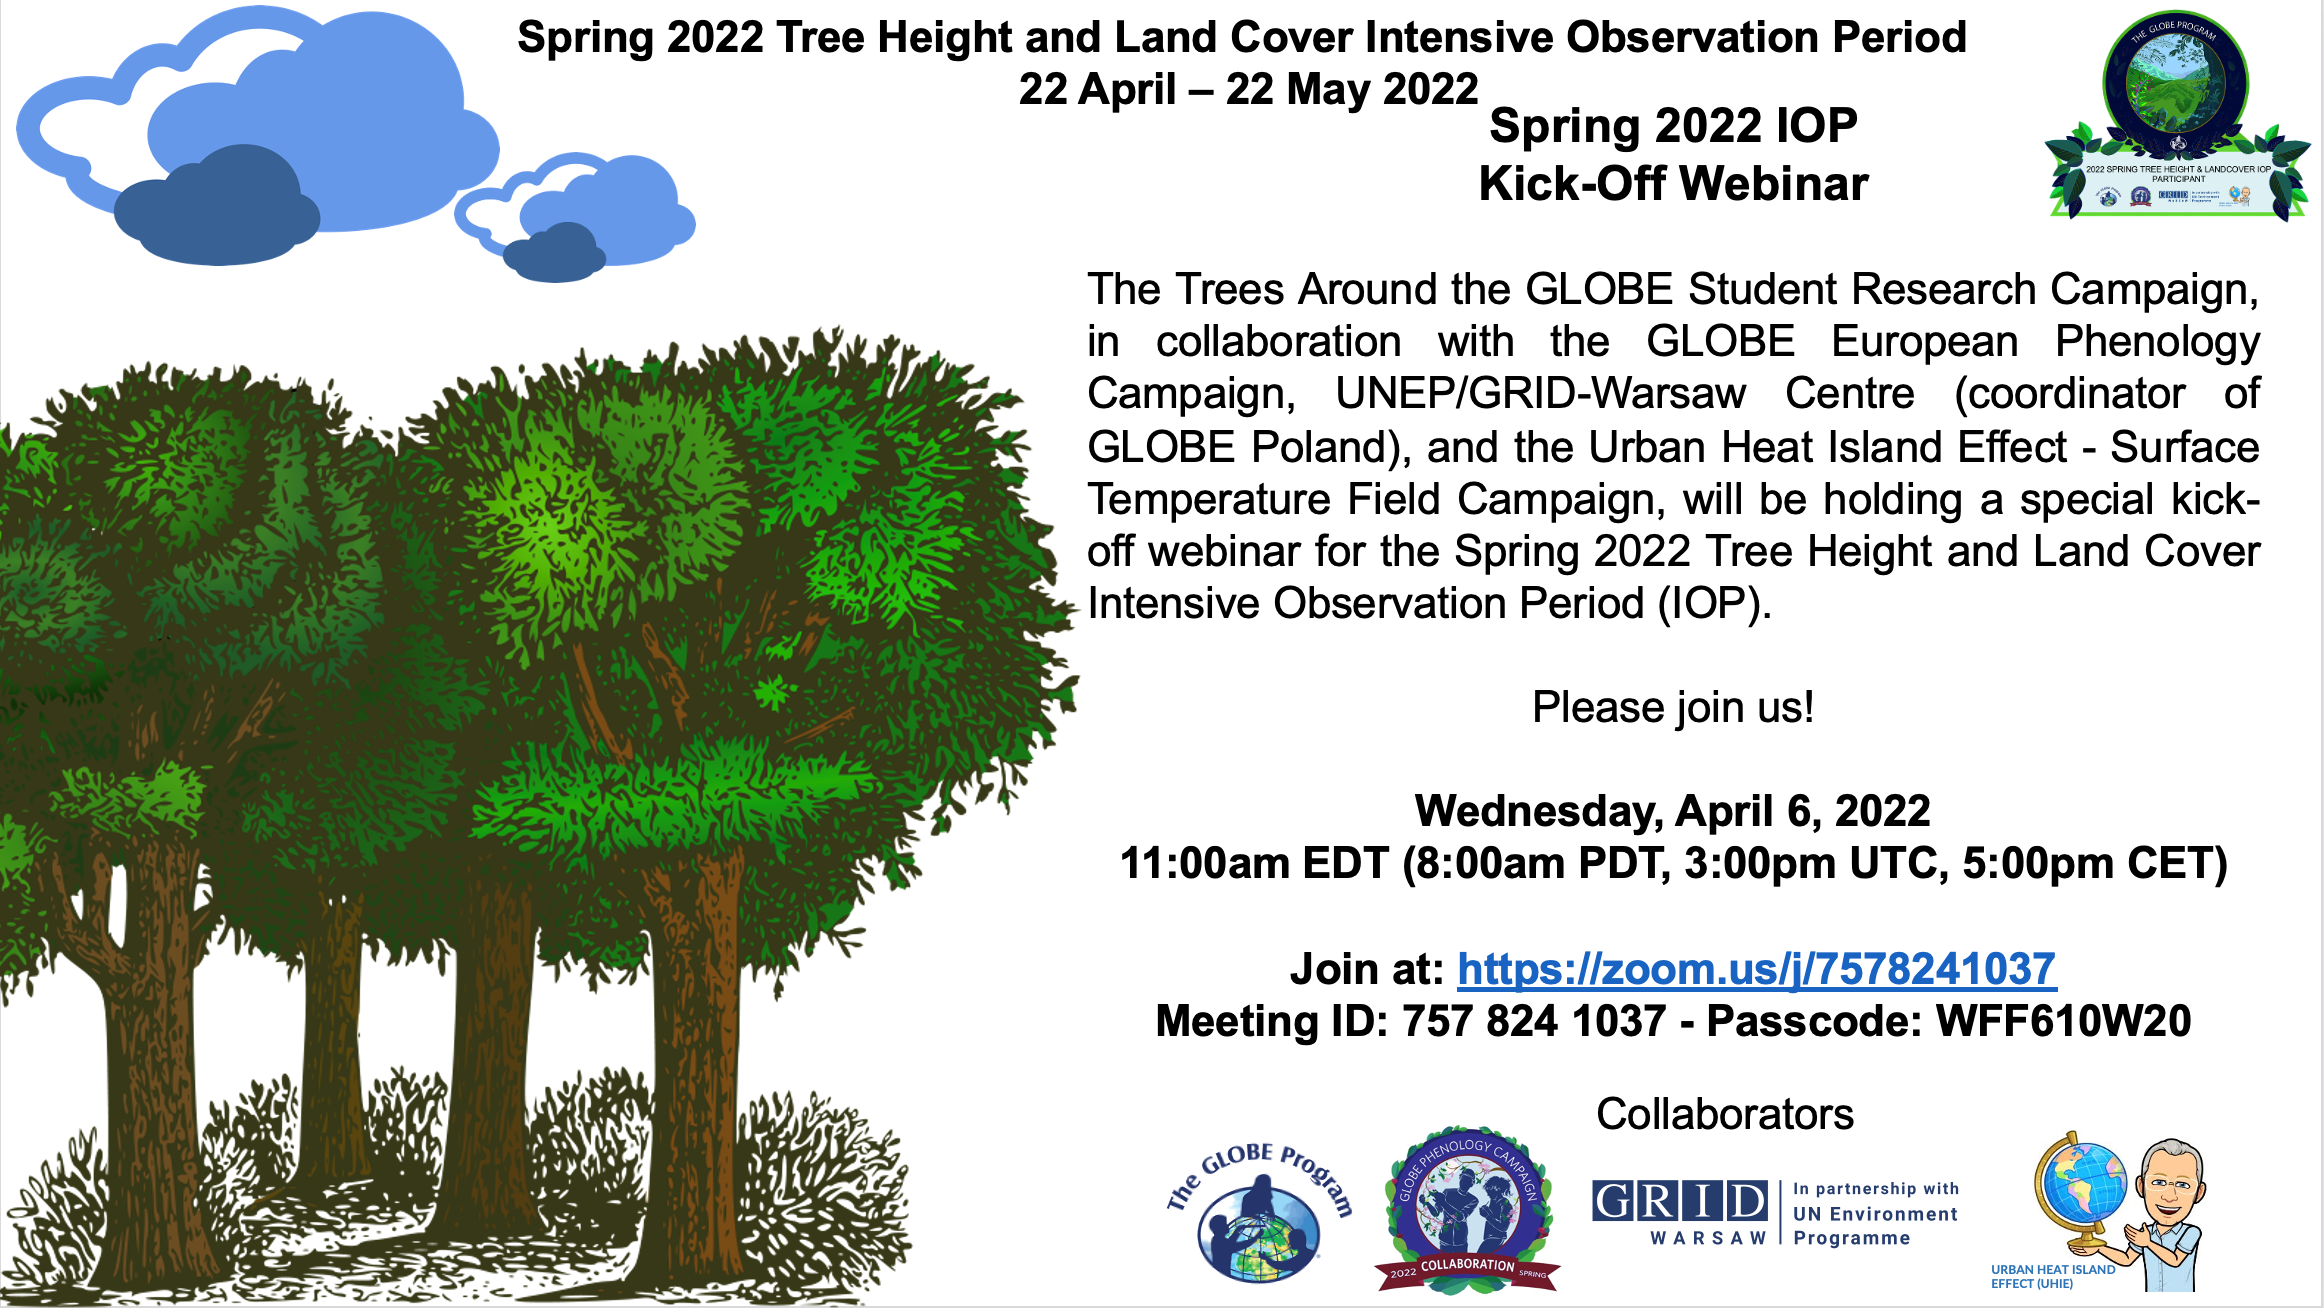 Spring 2022 Tree Height and Land Cover webinar sharable